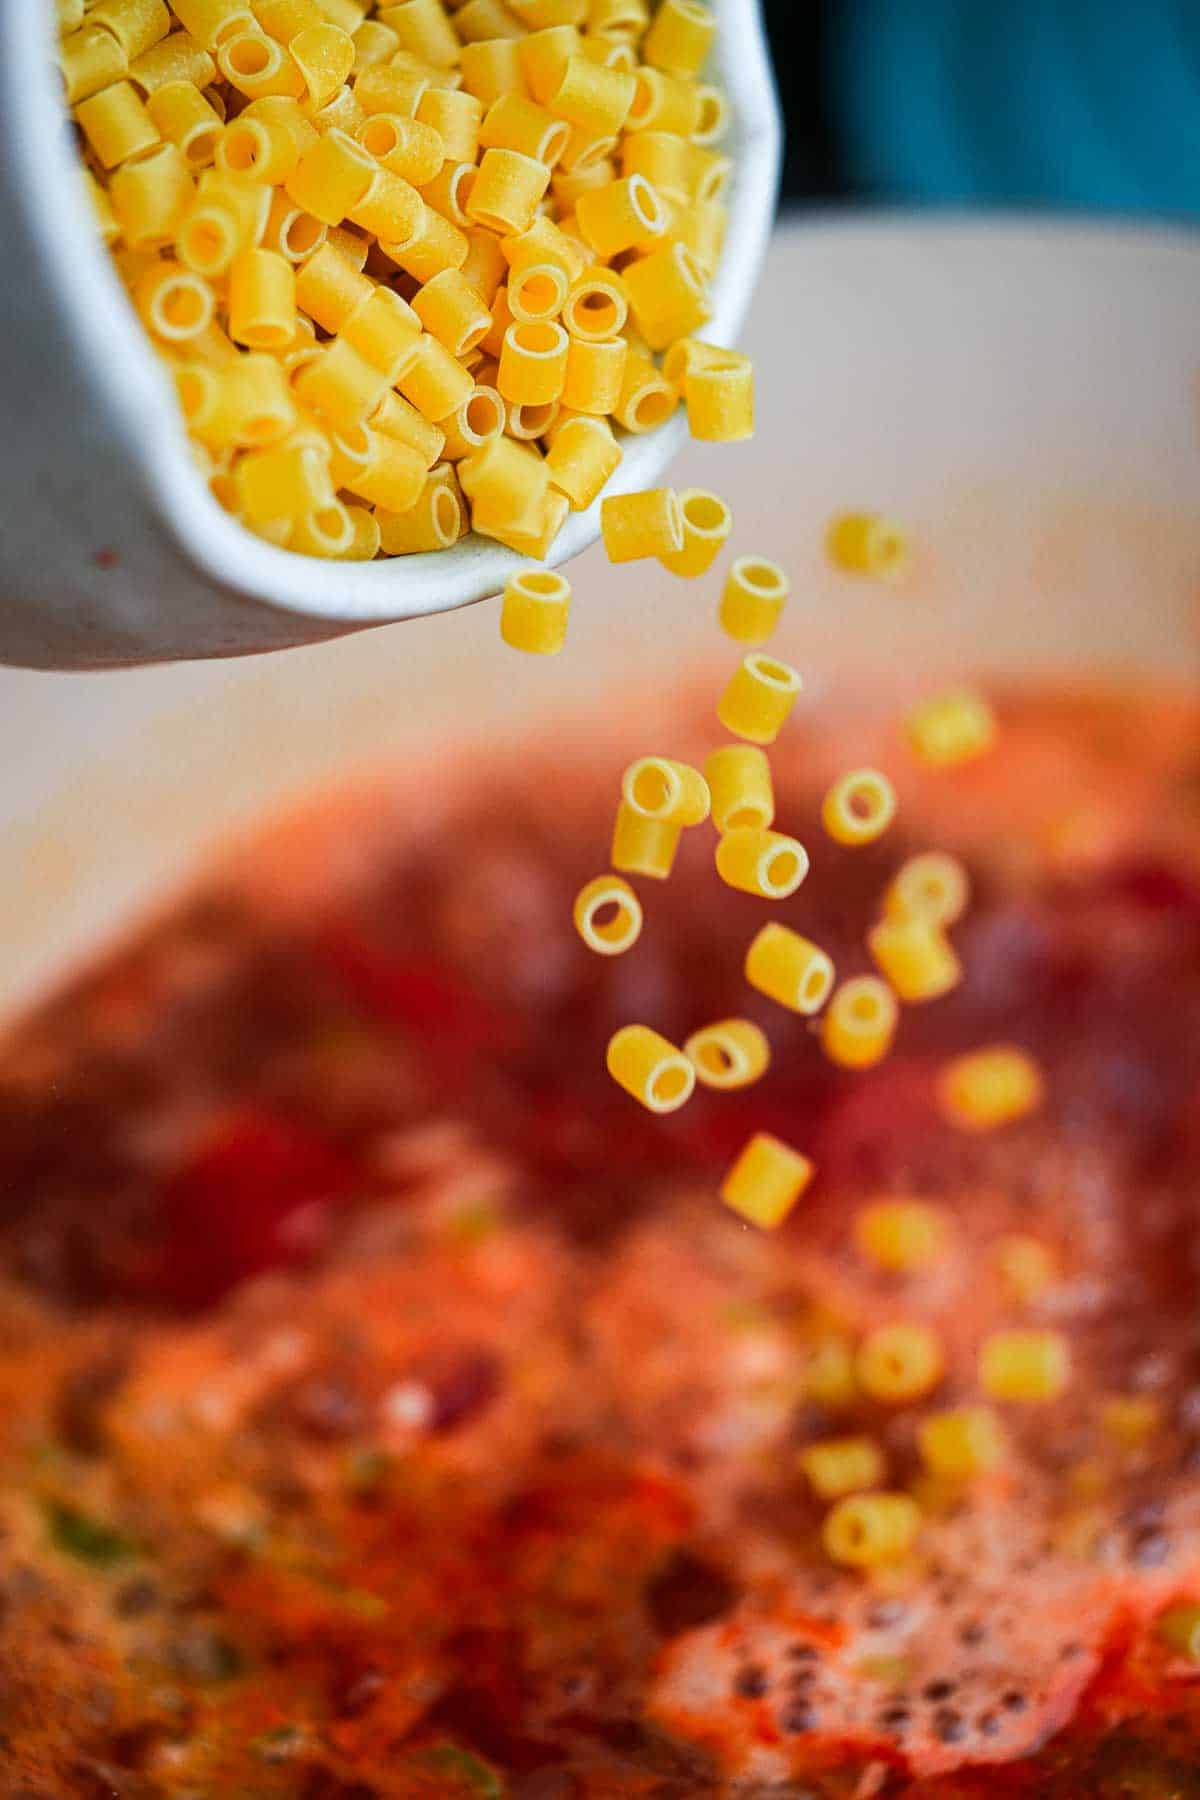 A bowl of pasta being poured into a pot of soup.